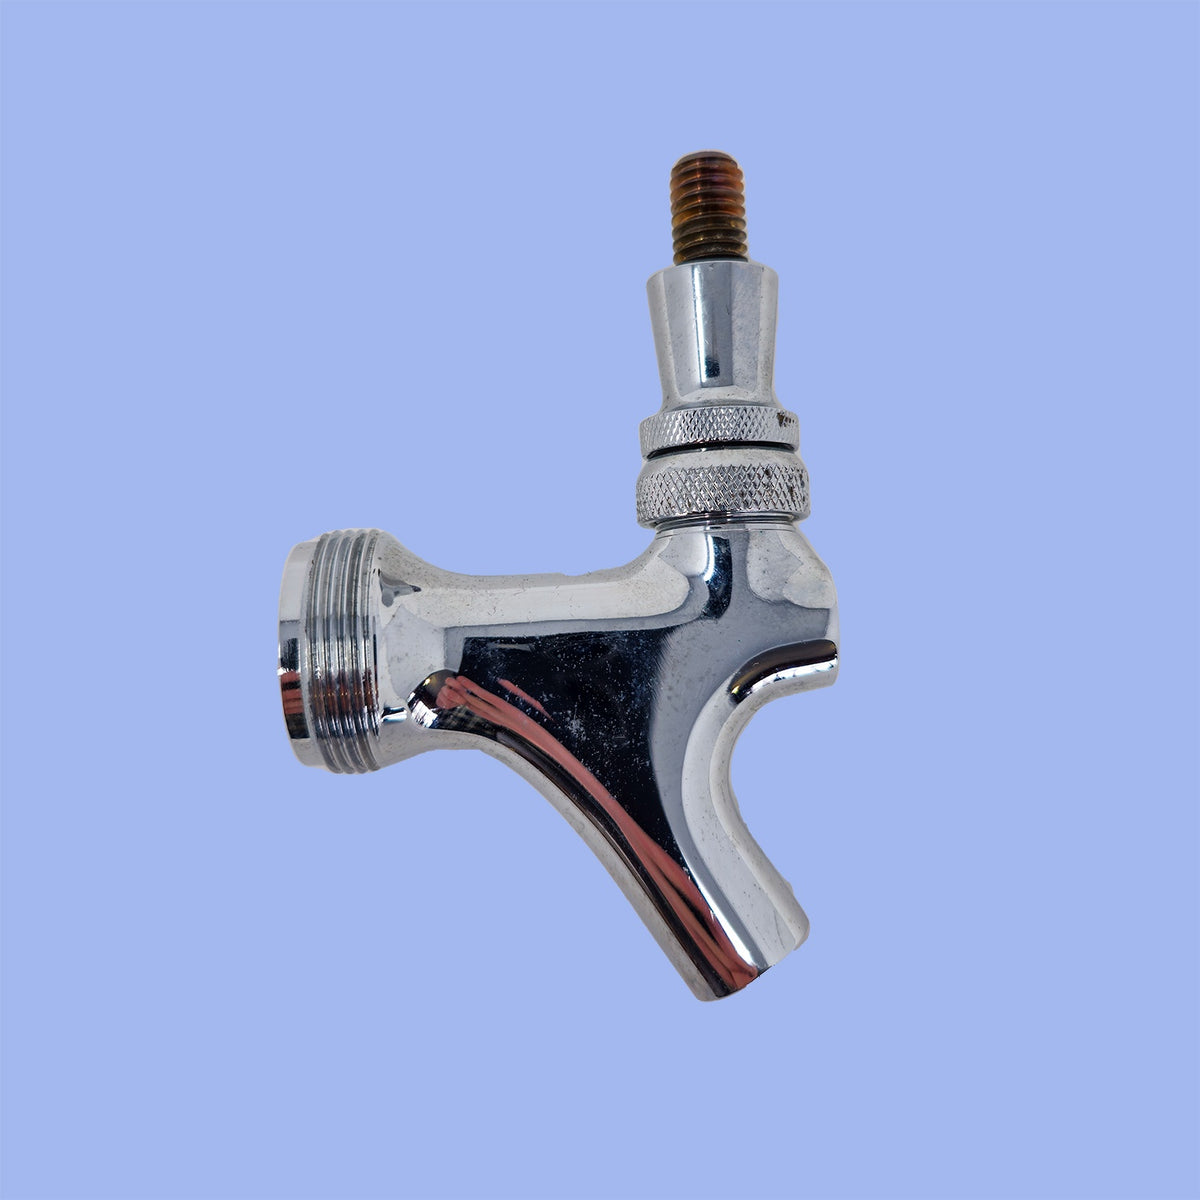 Chrome Plated Beer Faucet - USED